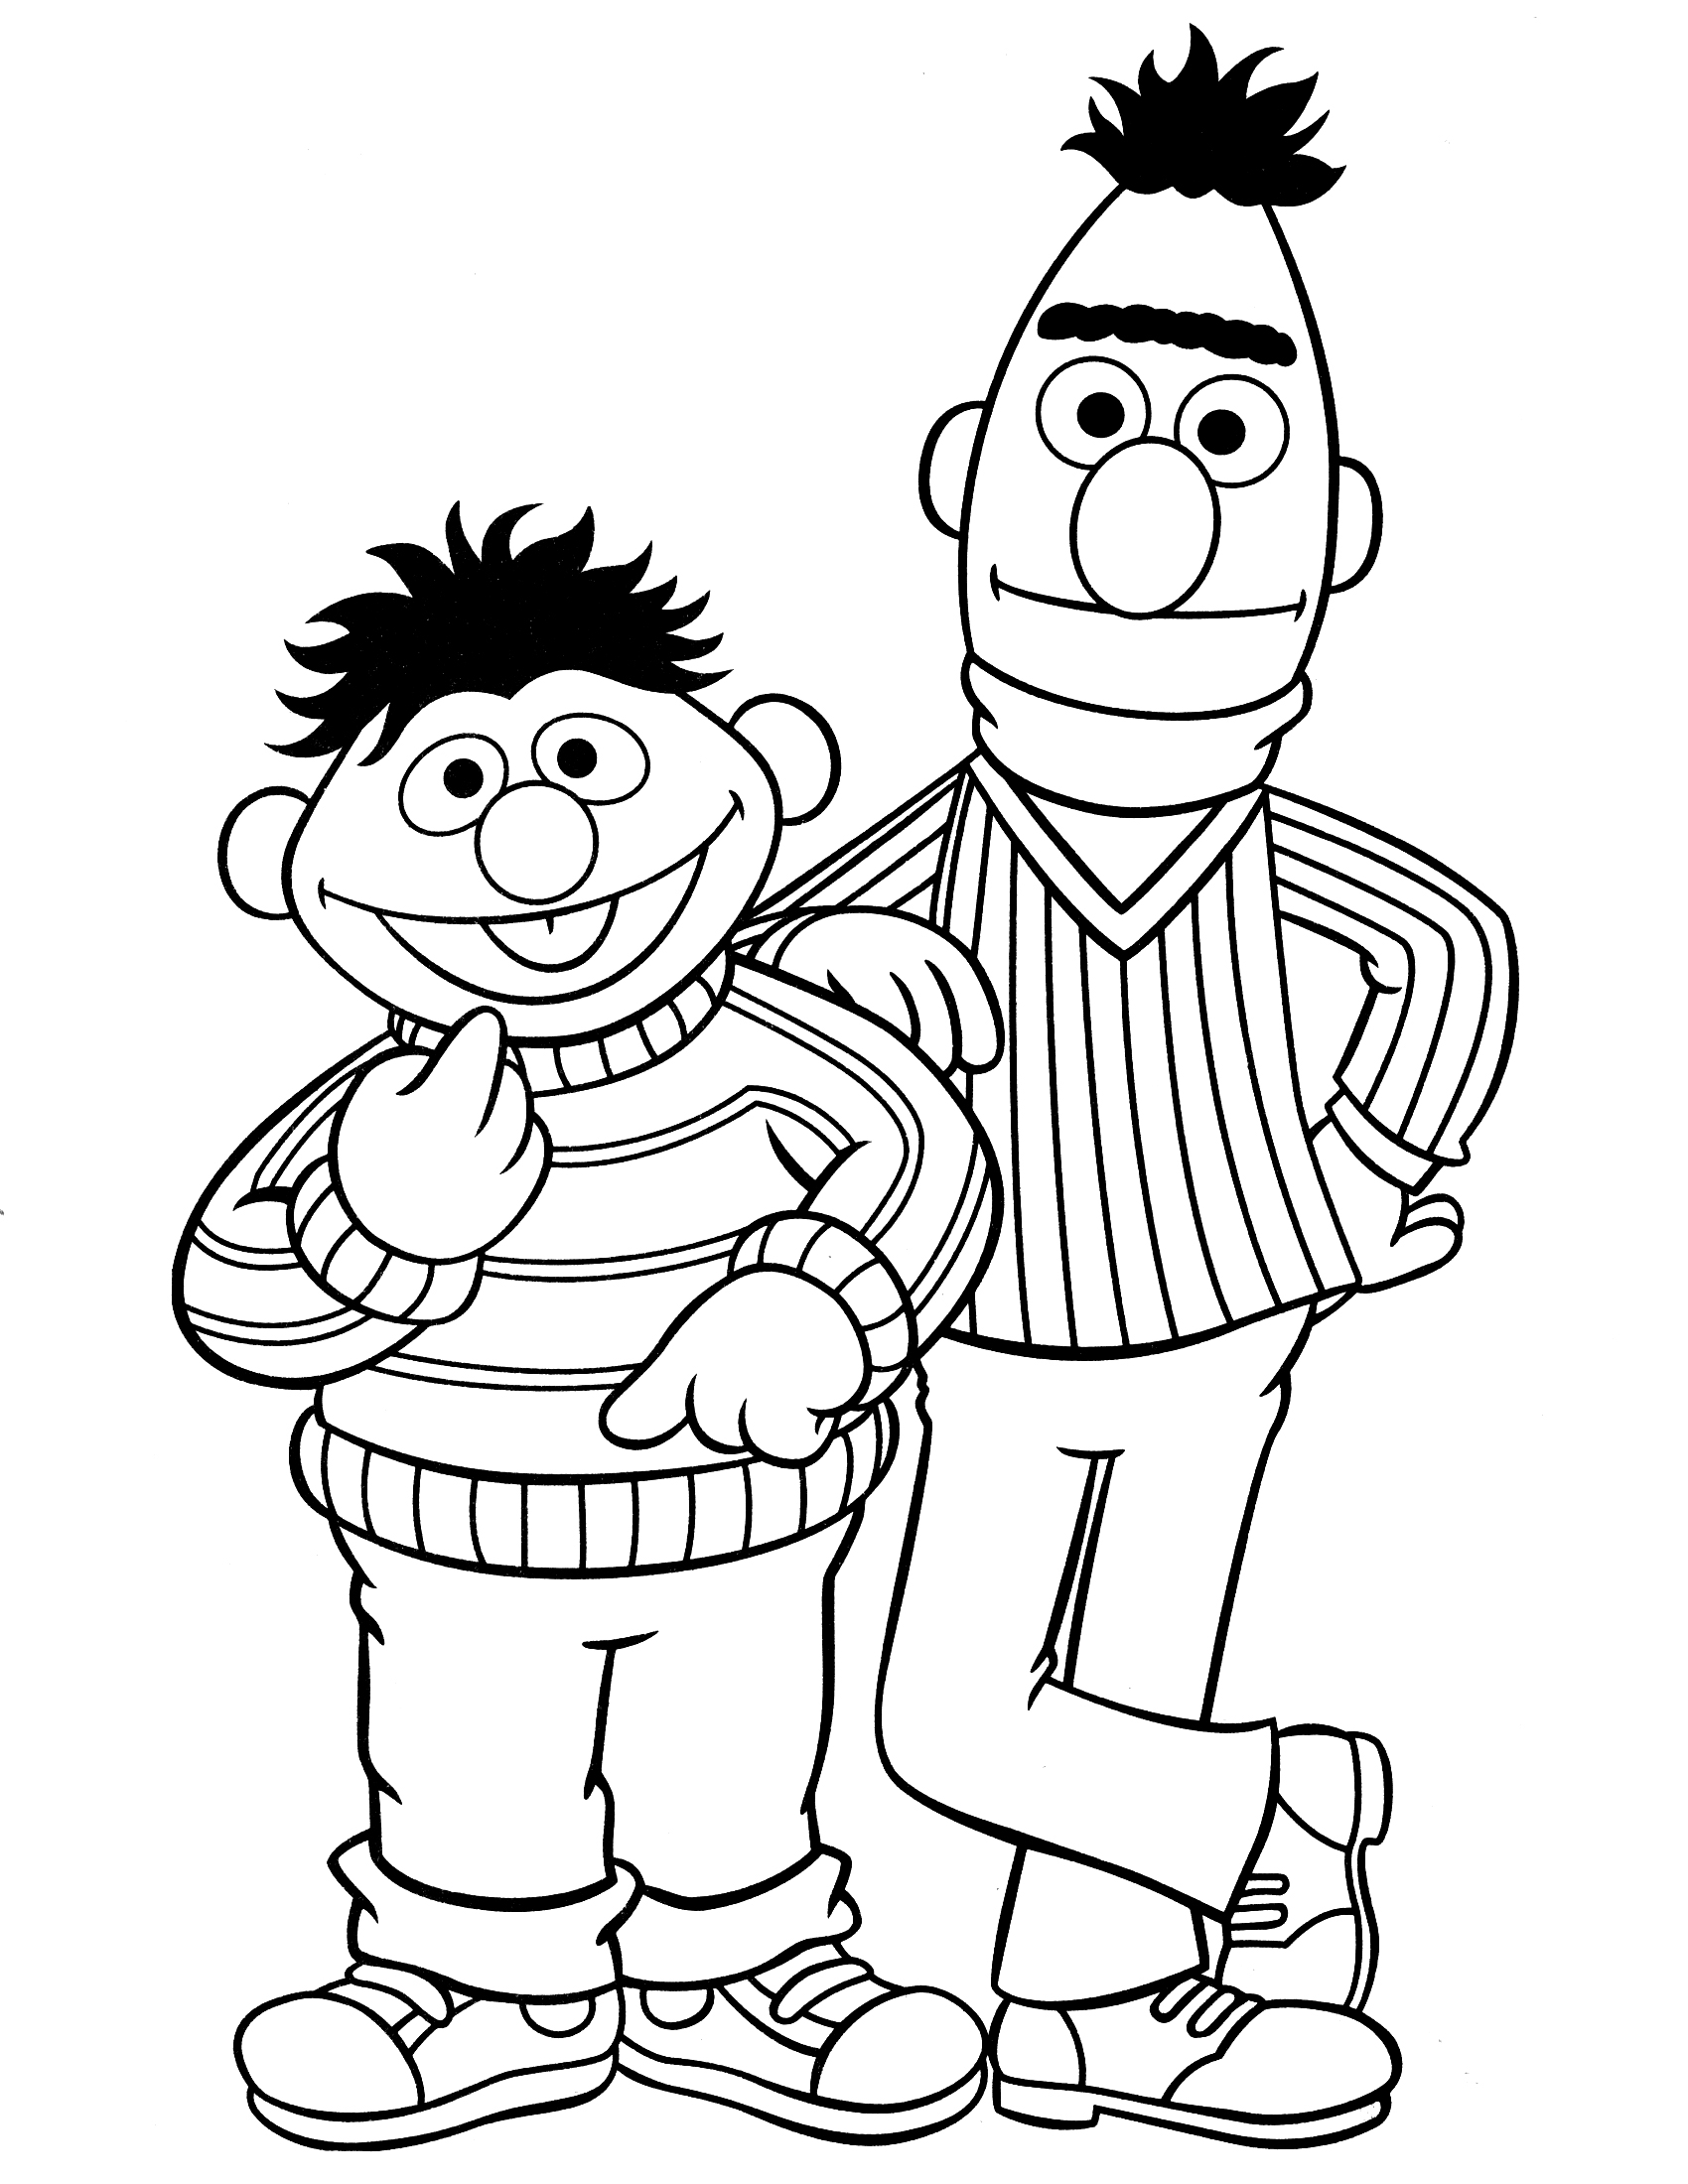 Free Sesame Street Printable Coloring Pages